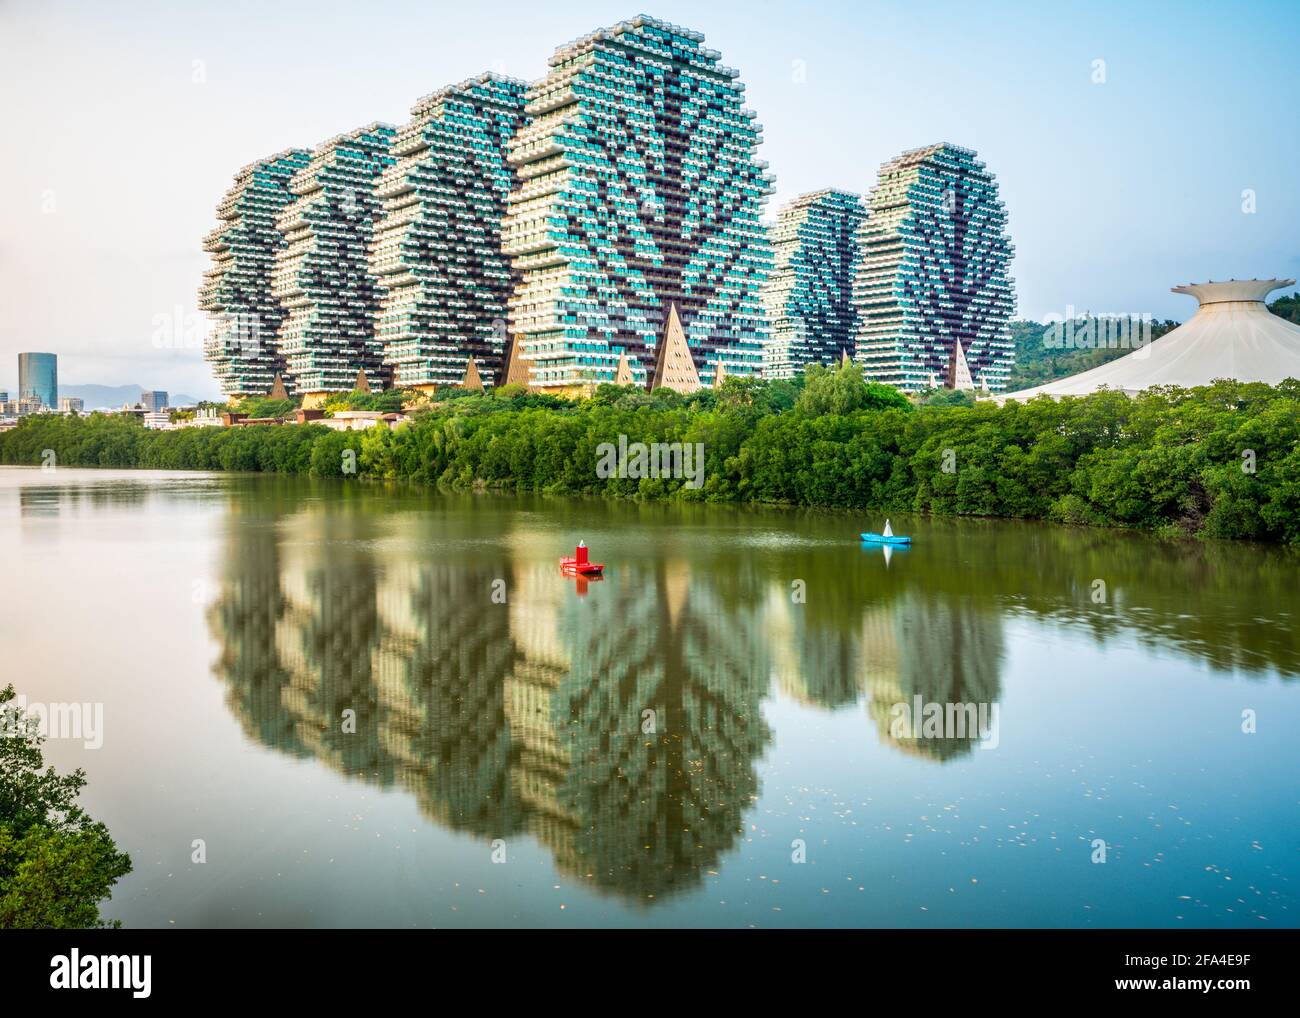 Sanya China , 25 March 2021 : Beautiful view of Beauty Crown Grand Tree hotel buildings aka Lego trees hotel with water reflection on Linchun river in Stock Photo